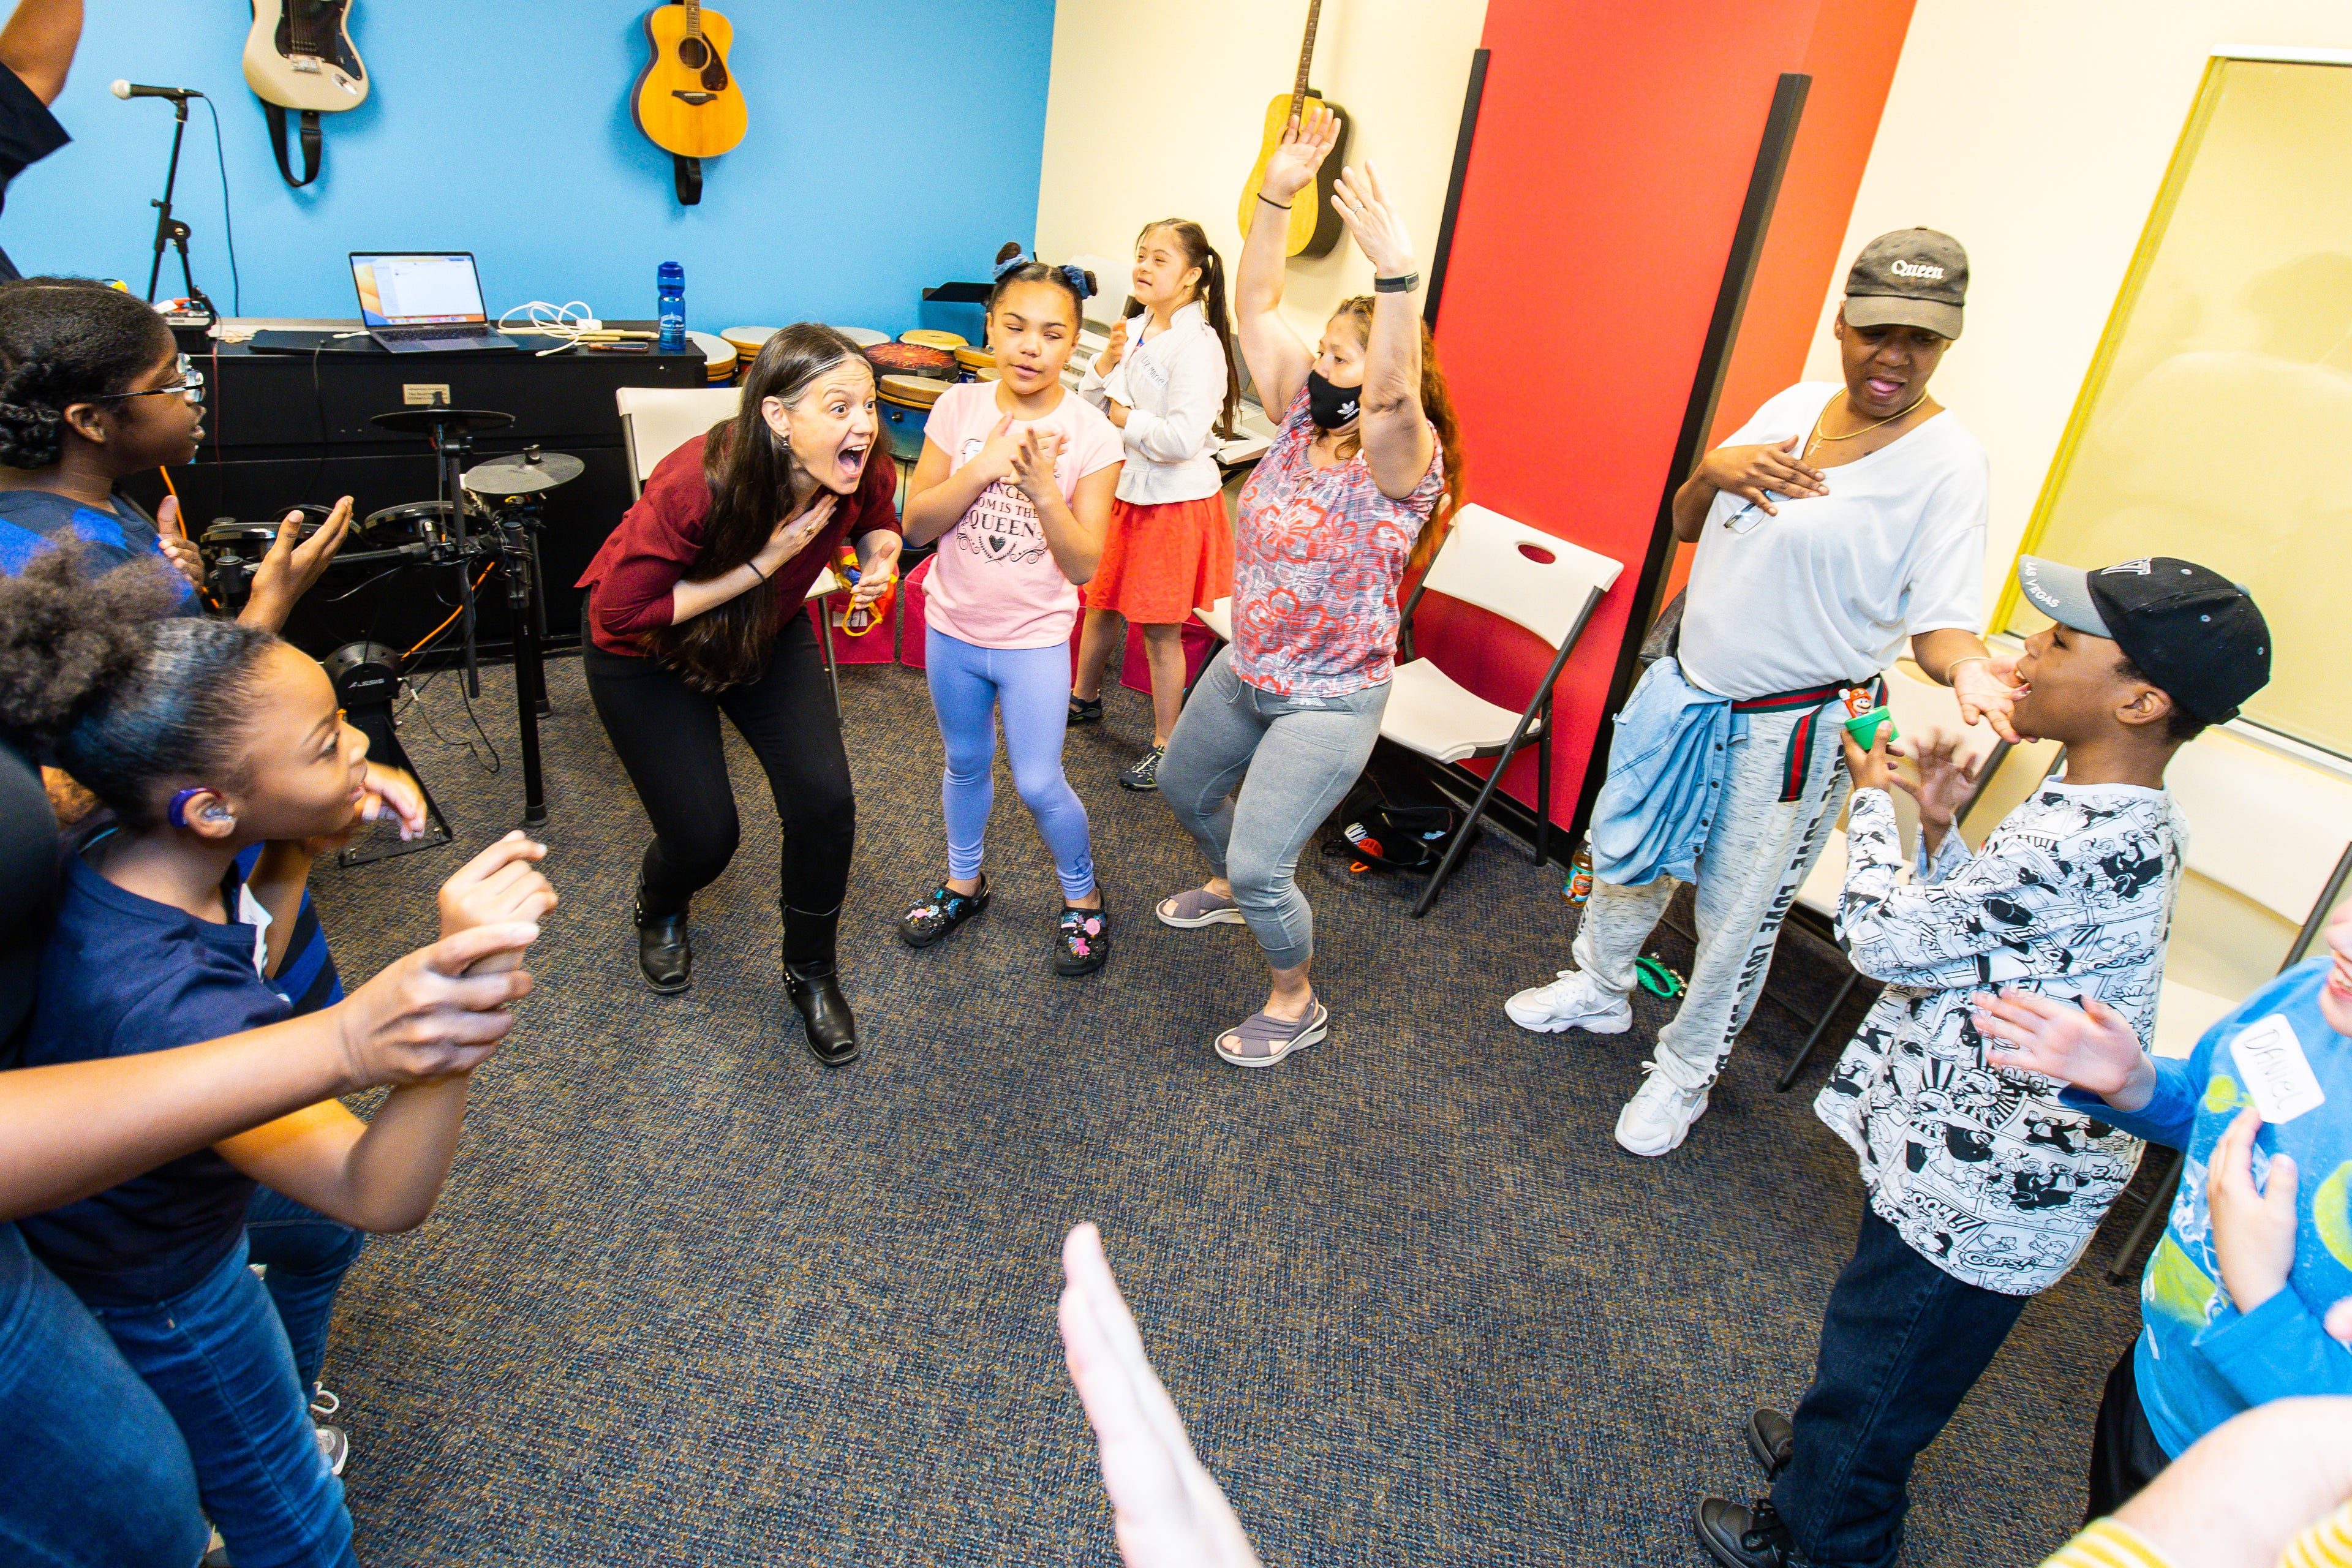 Image of a class at Daniel's Music Foundation. The participants are clapping and dancing.